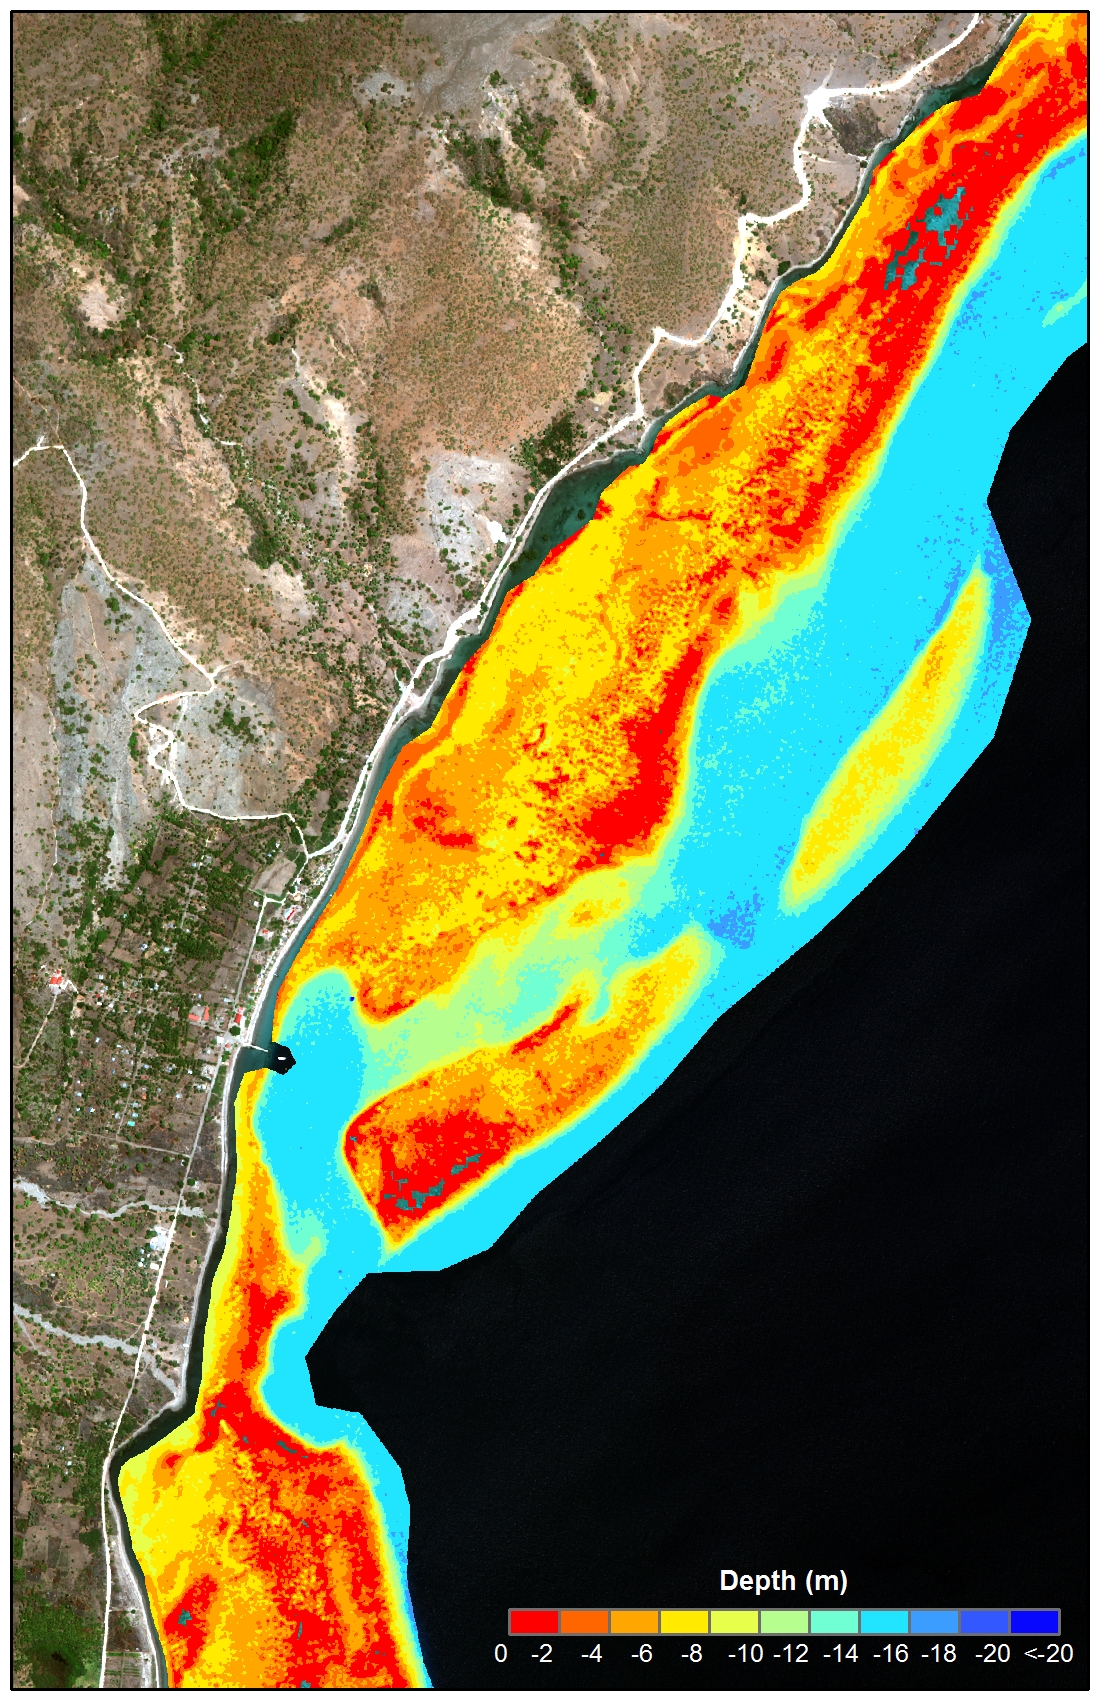 An example of the bathymetry data generated for Timor-Leste from WorldView-2 satellite imagery.